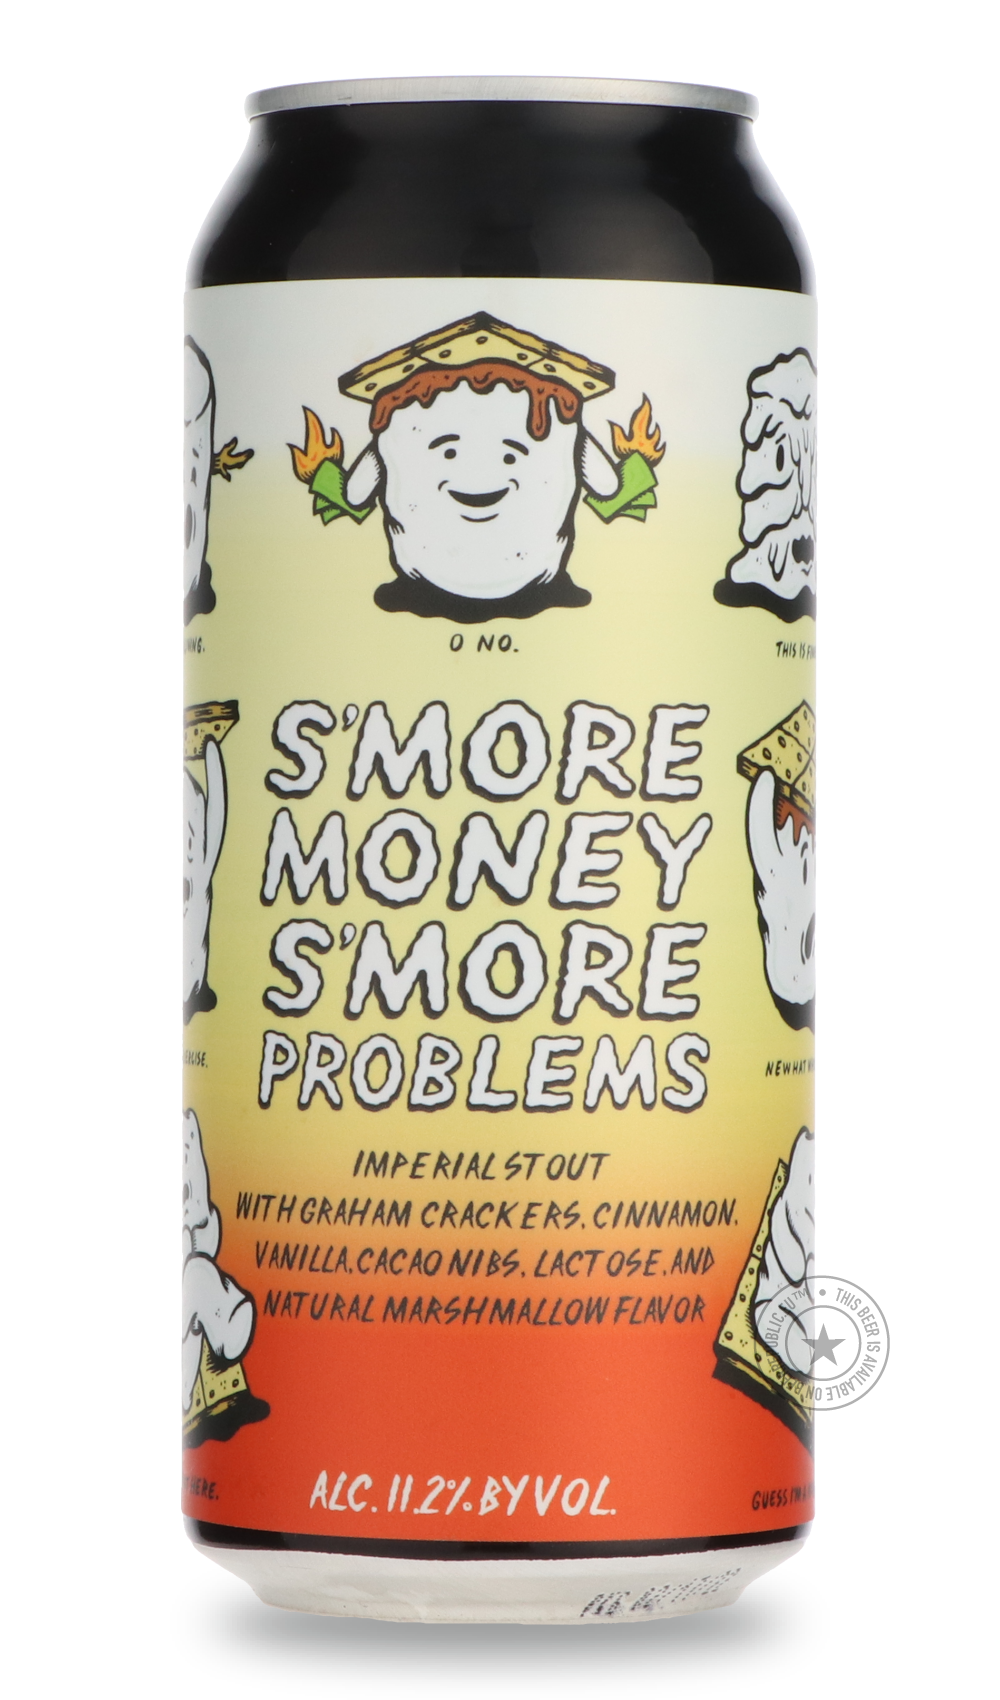 -Pipeworks- S'more Money, S'more Problems-Stout & Porter- Only @ Beer Republic - The best online beer store for American & Canadian craft beer - Buy beer online from the USA and Canada - Bier online kopen - Amerikaans bier kopen - Craft beer store - Craft beer kopen - Amerikanisch bier kaufen - Bier online kaufen - Acheter biere online - IPA - Stout - Porter - New England IPA - Hazy IPA - Imperial Stout - Barrel Aged - Barrel Aged Imperial Stout - Brown - Dark beer - Blond - Blonde - Pilsner - Lager - Wheat